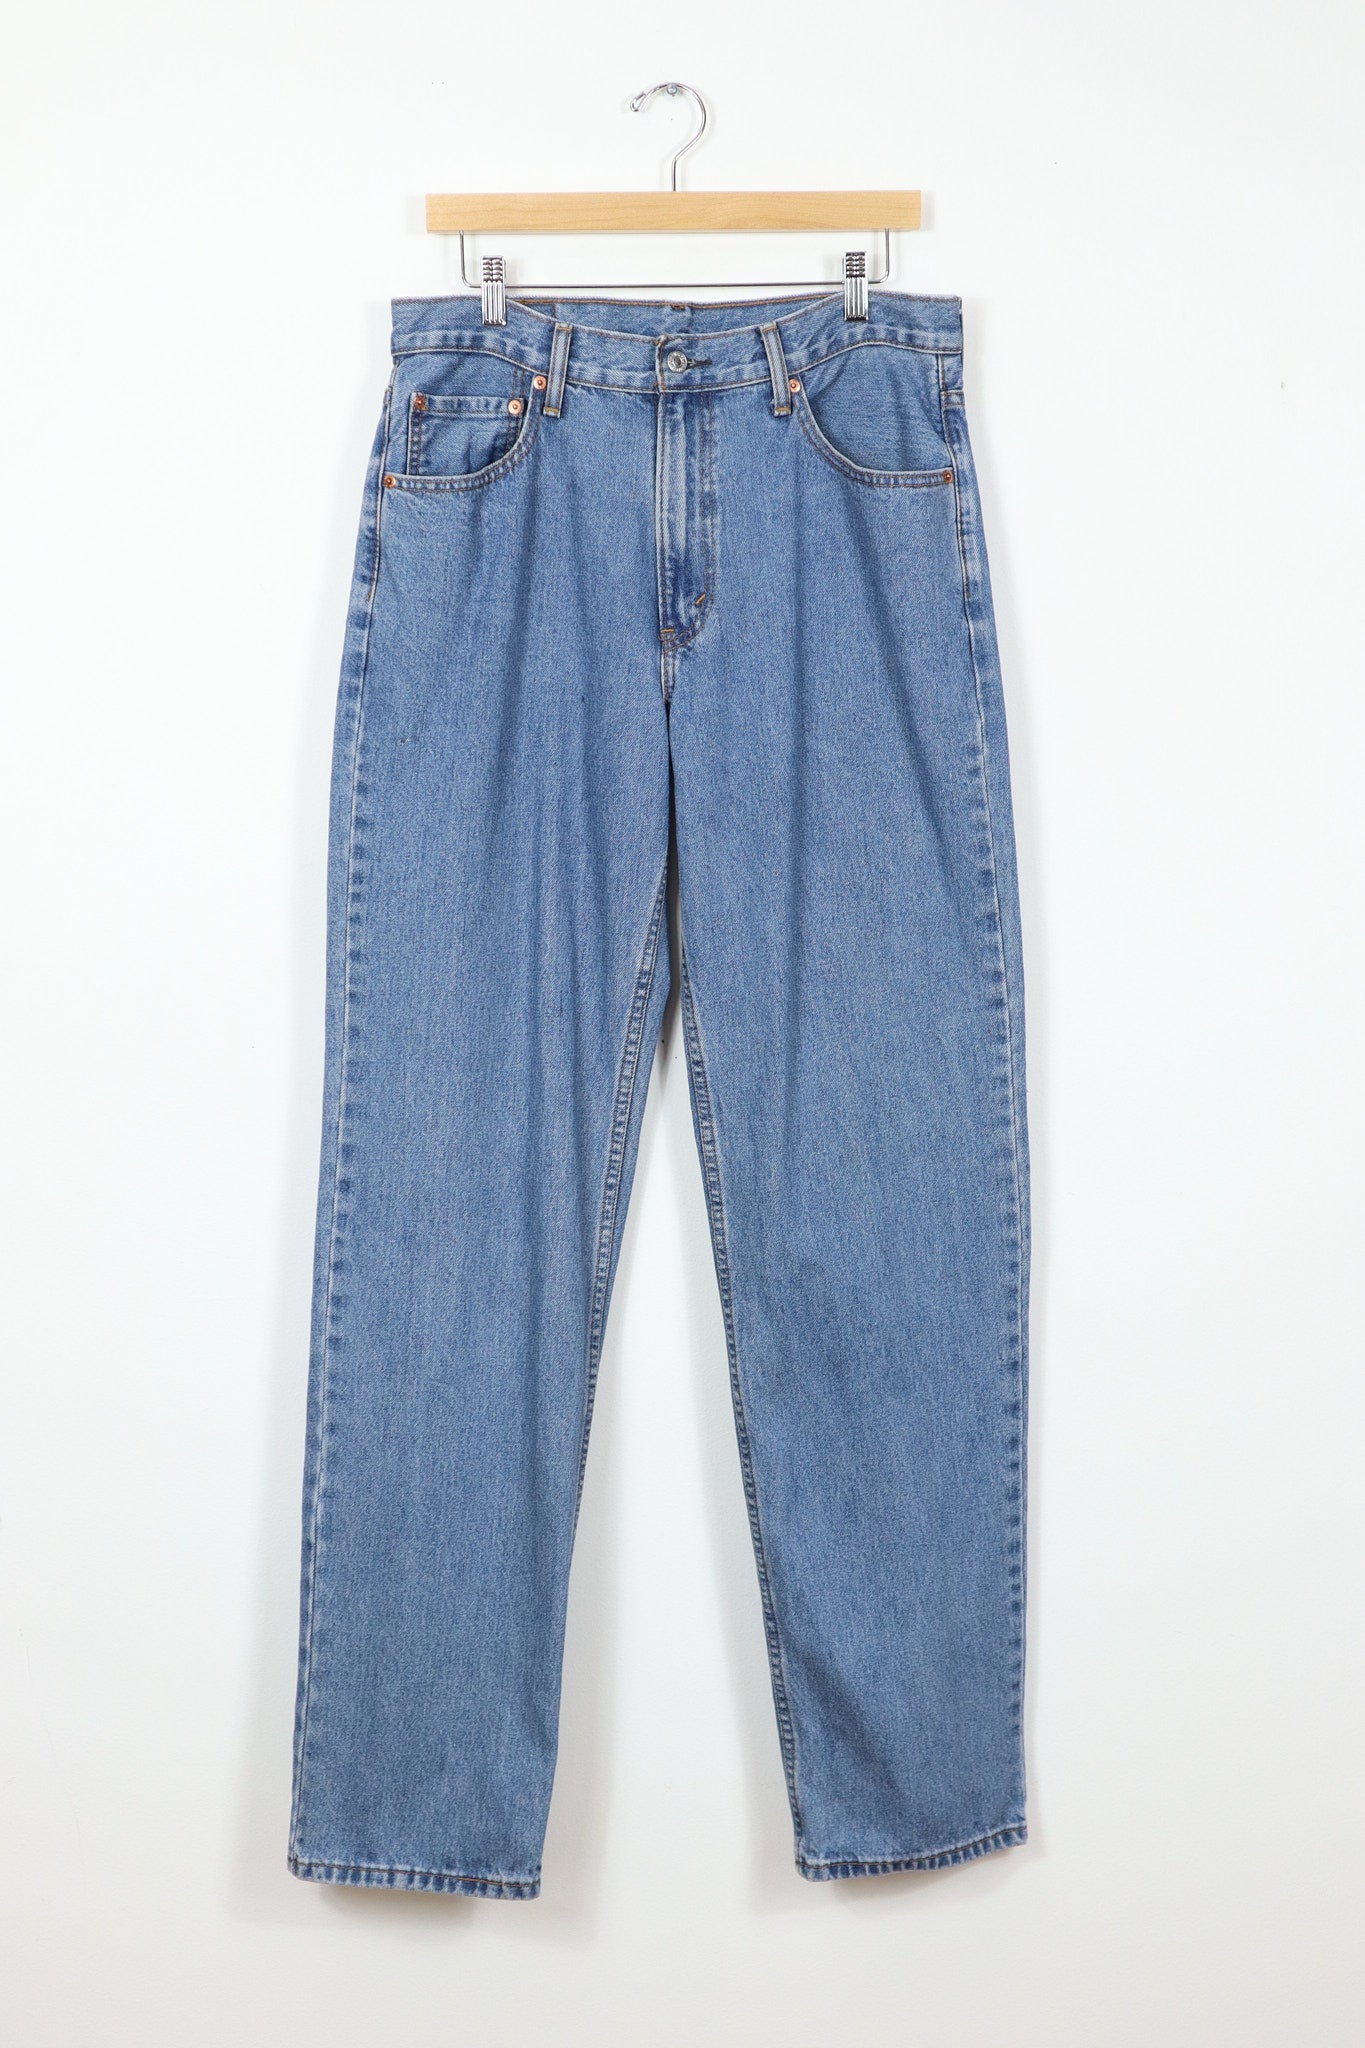 Vintage 550 Levi's Relaxed Fit Jean